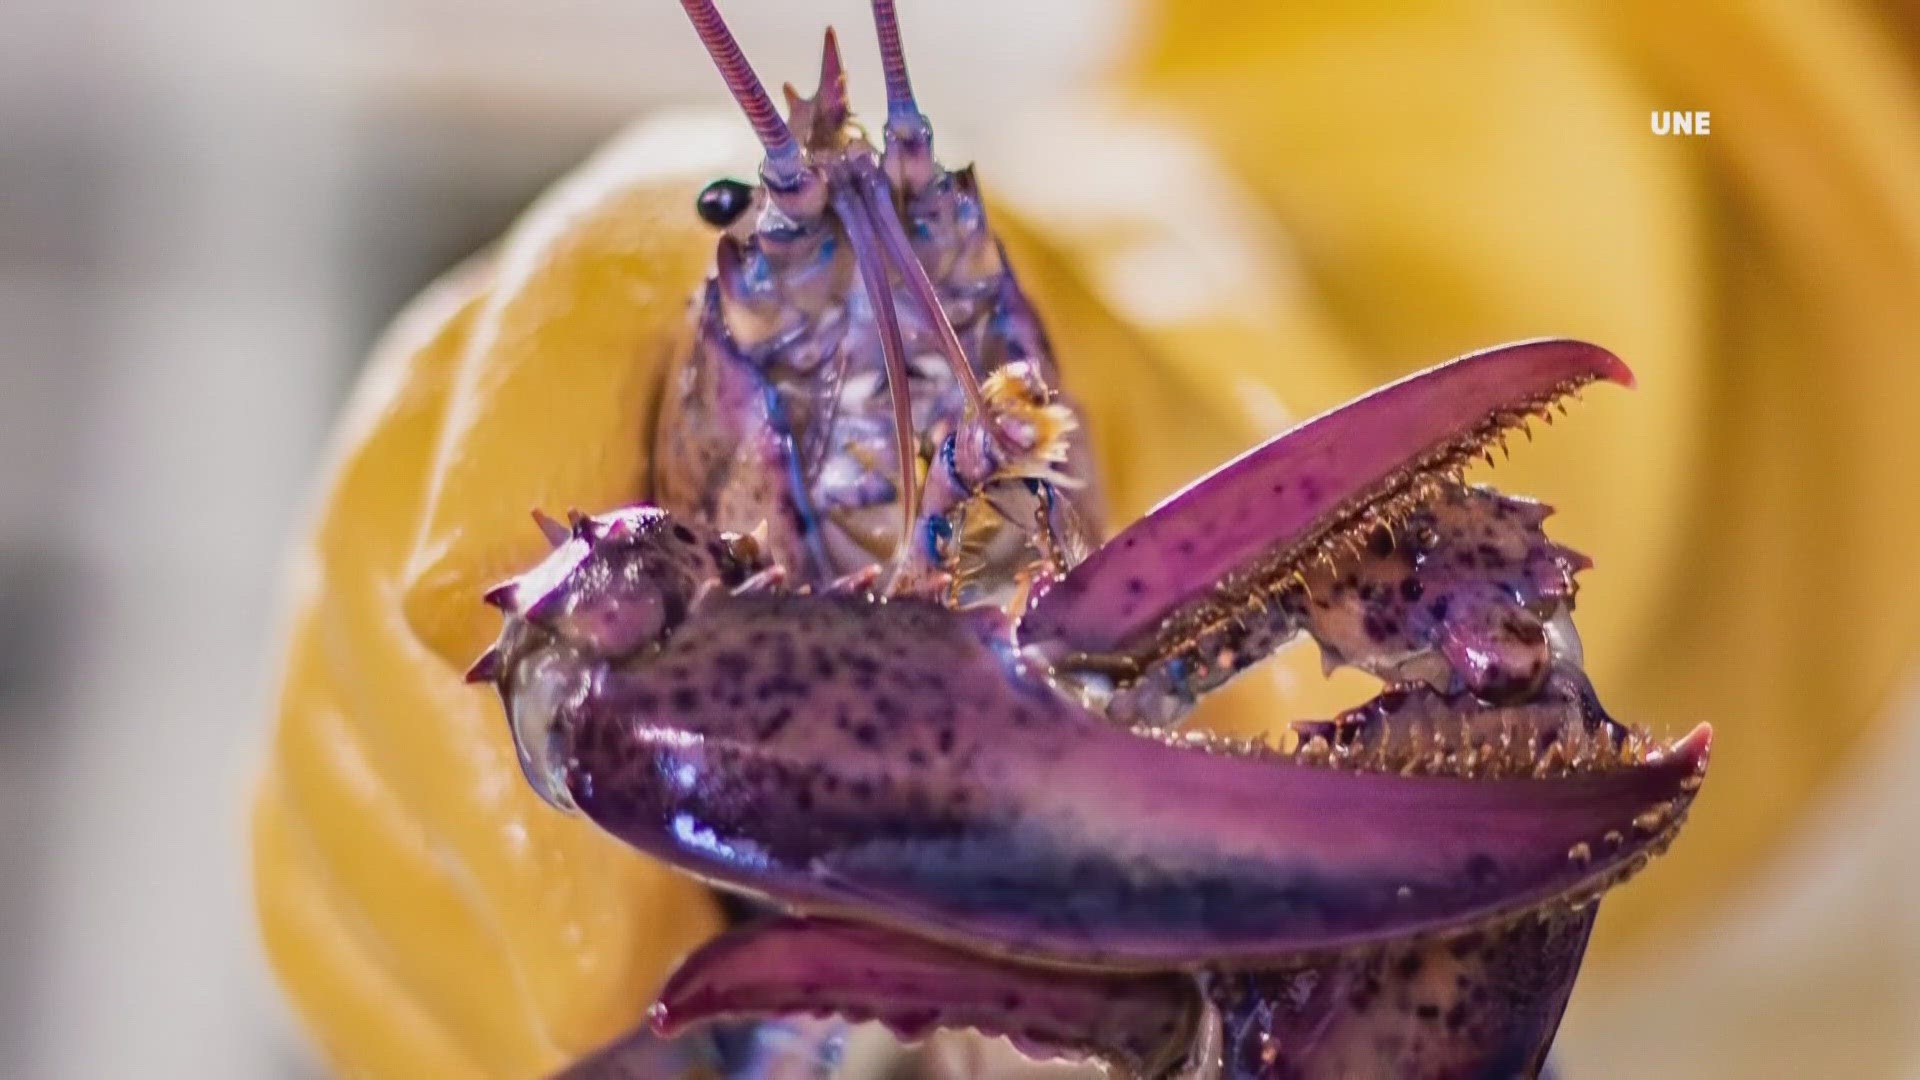 Student researchers are using DNA testing to try to solve the mystery behind these colorful lobsters.